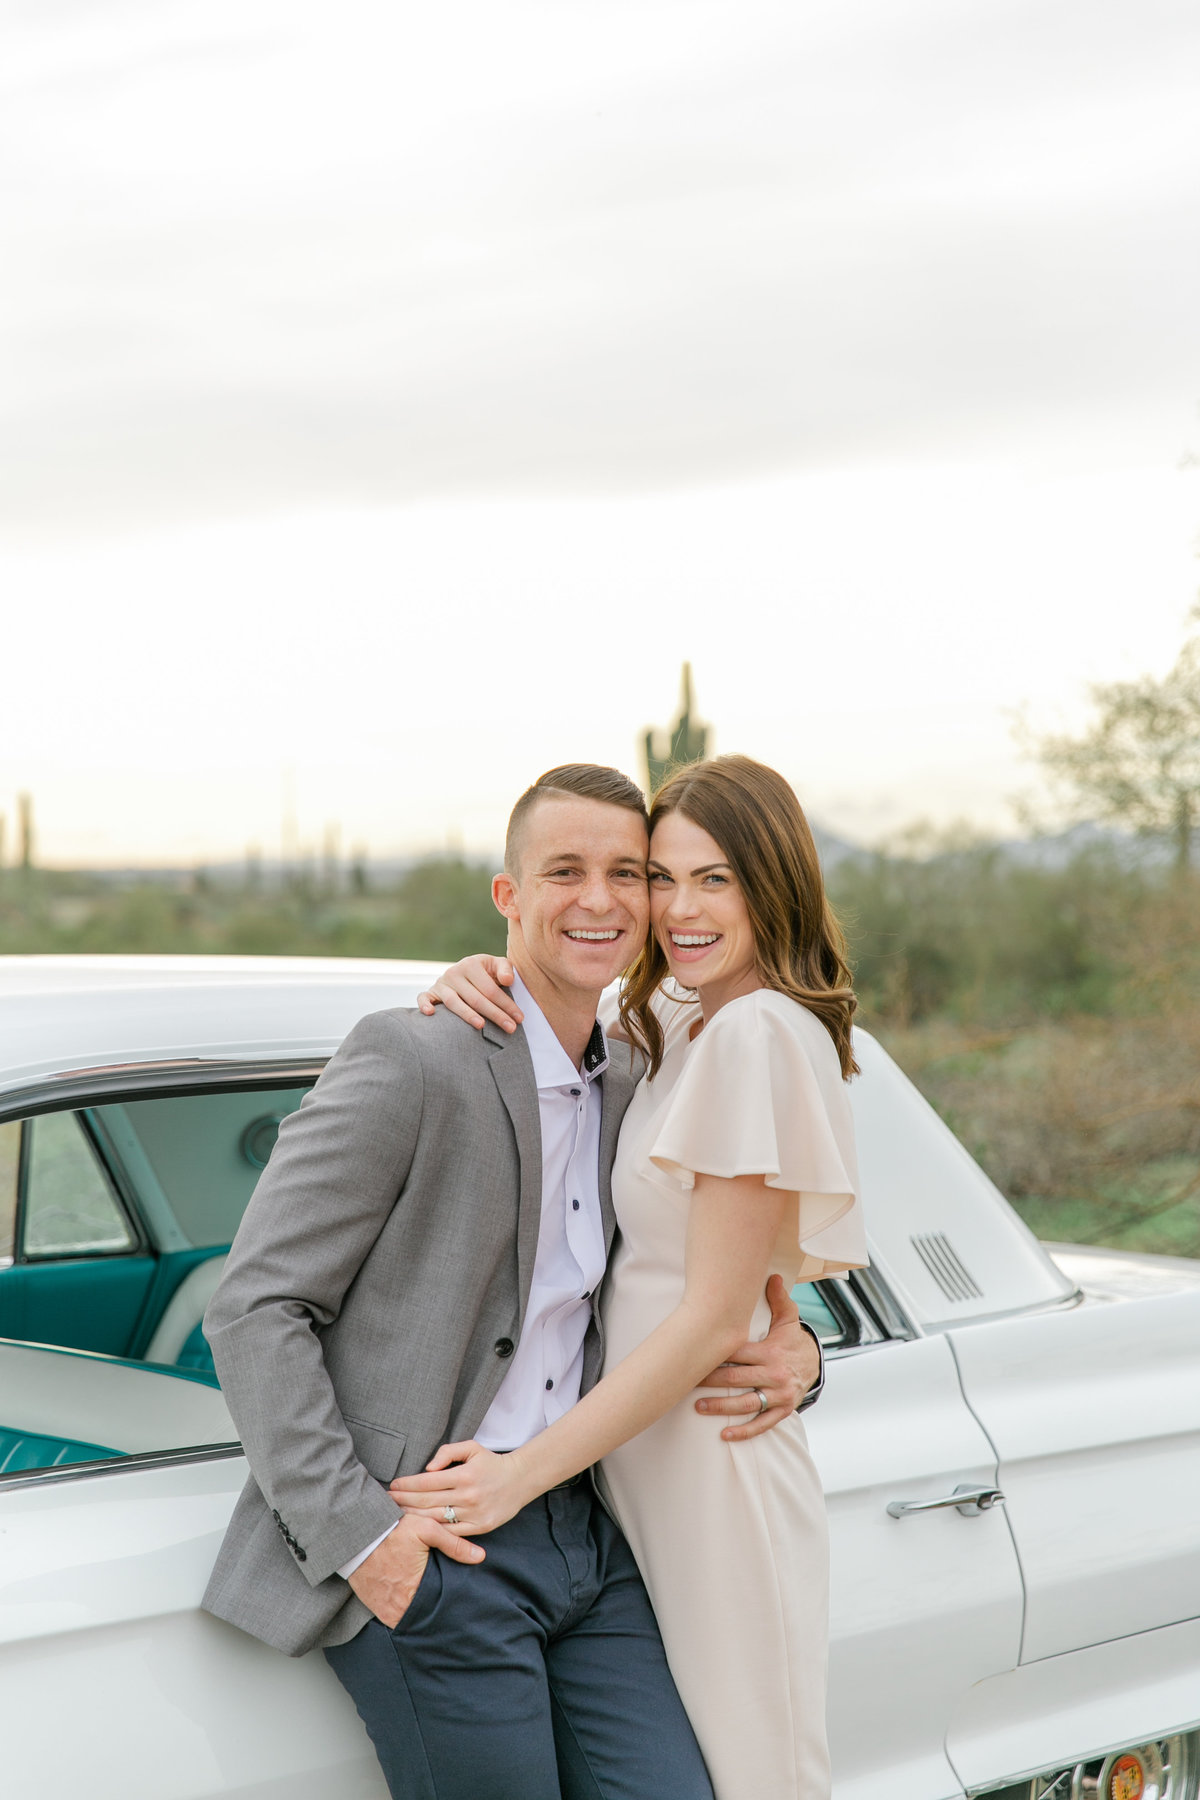 Karlie Colleen Photography - Arizona Engagement Photos- Chacey & Stefan-130